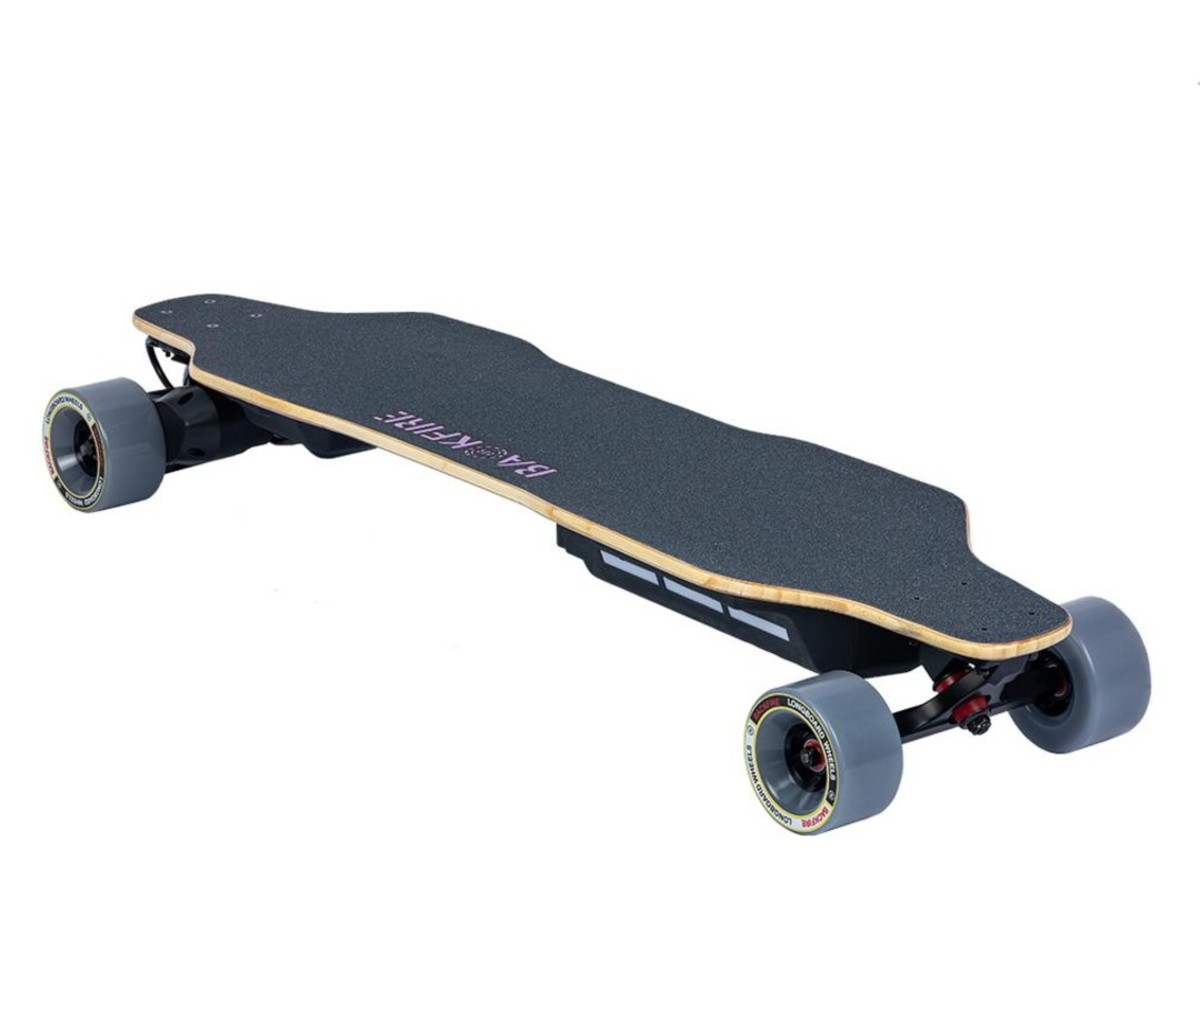 Electric Skateboards From $250 to Over $2,500 Men's Journal - Men's